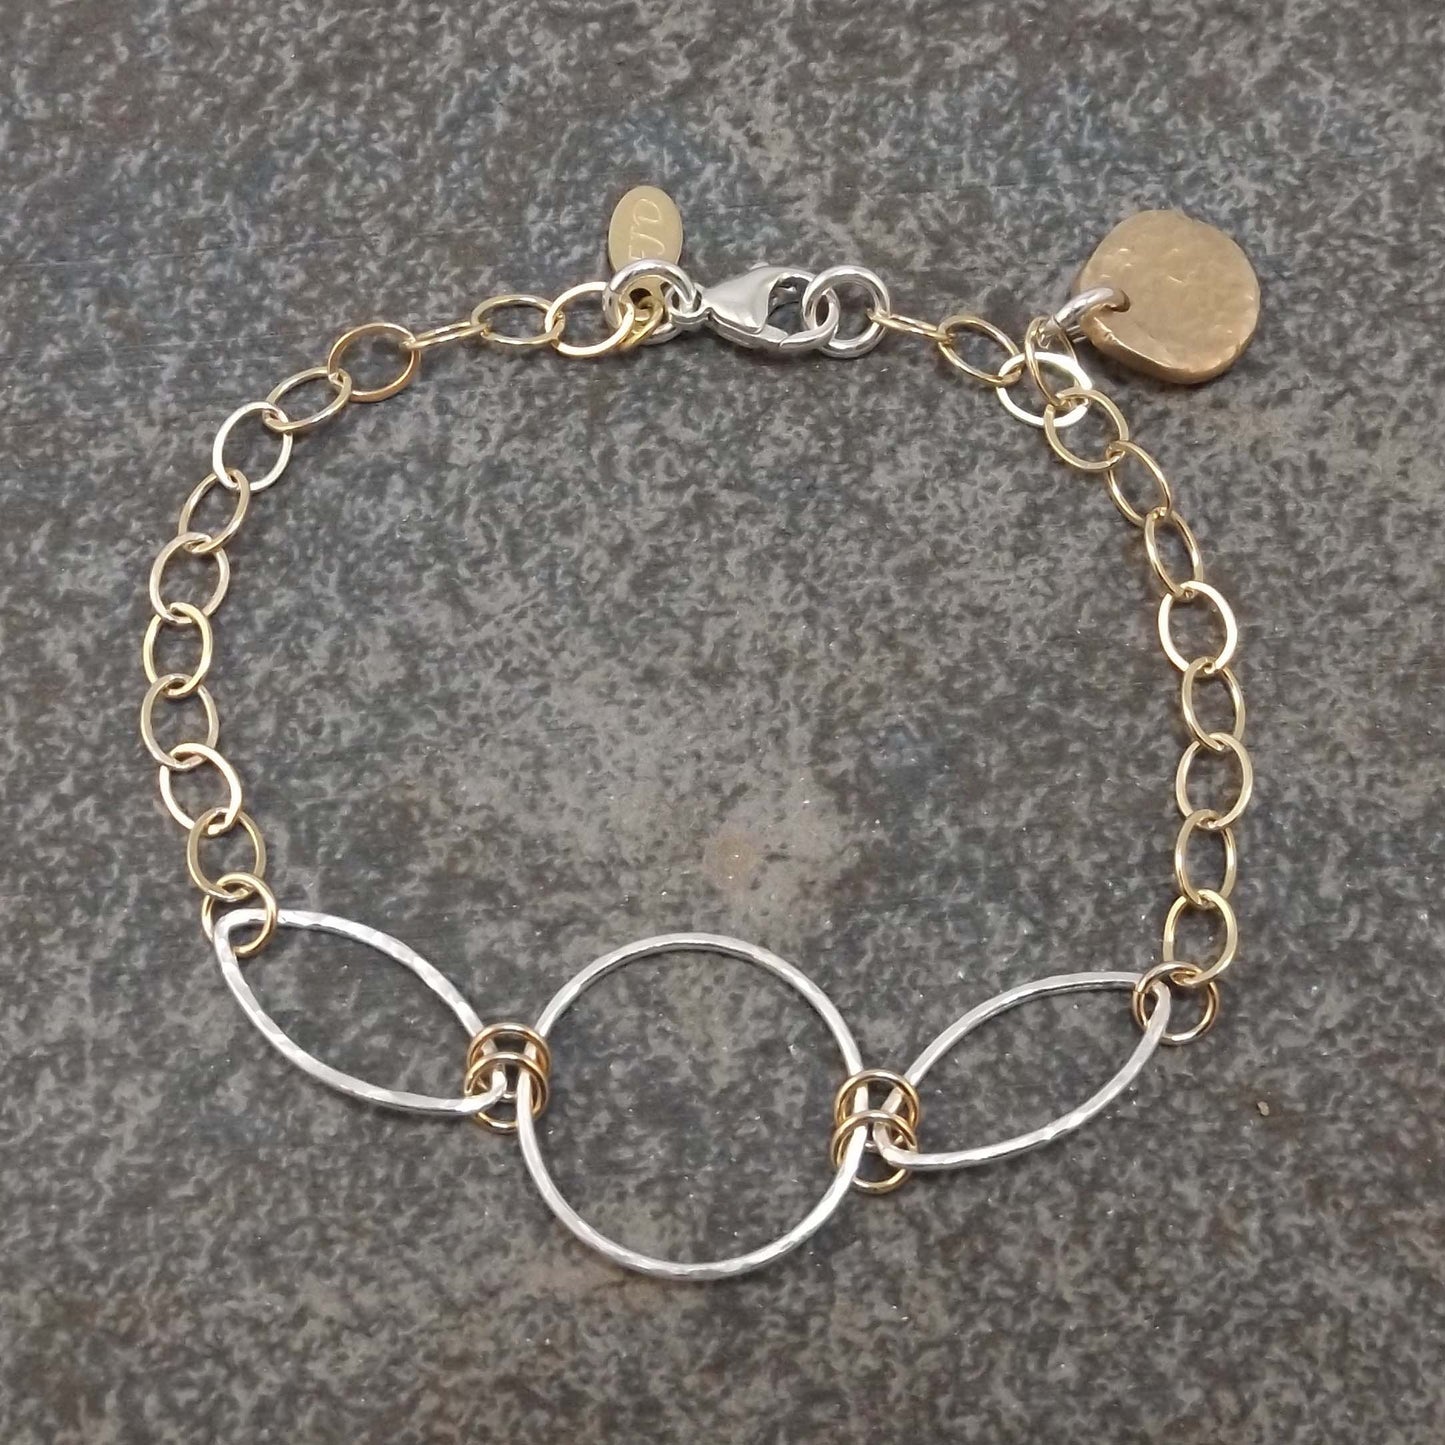 Abigail - Gold and Silver Bracelet